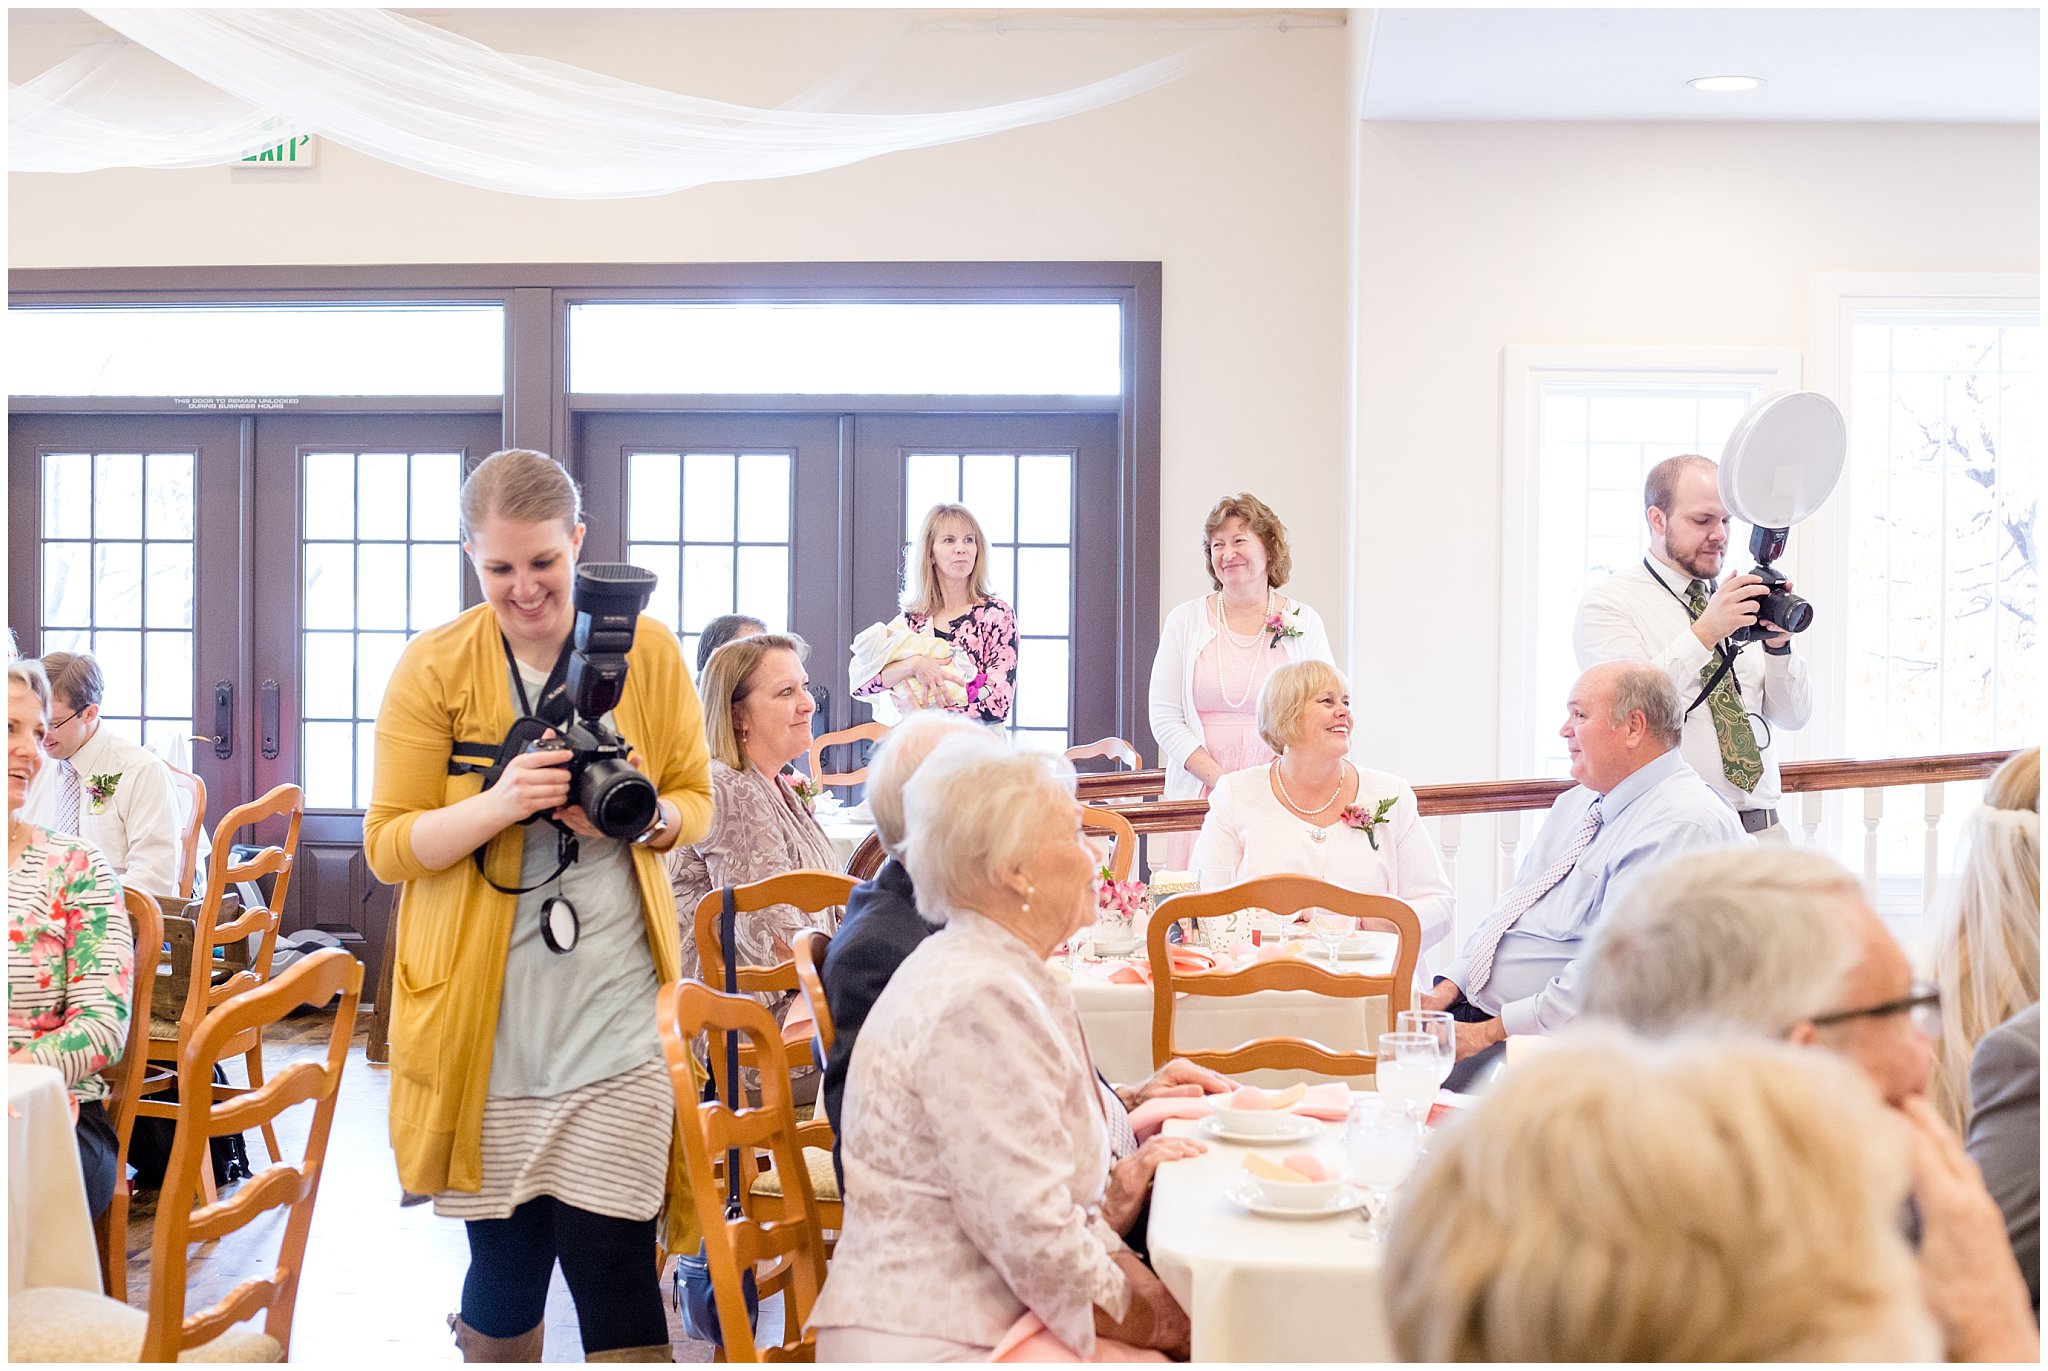 Utah Photographers at luncheon at Eldredge Manor | Husband and Wife Photography Team | Jessie and Dallin Photography